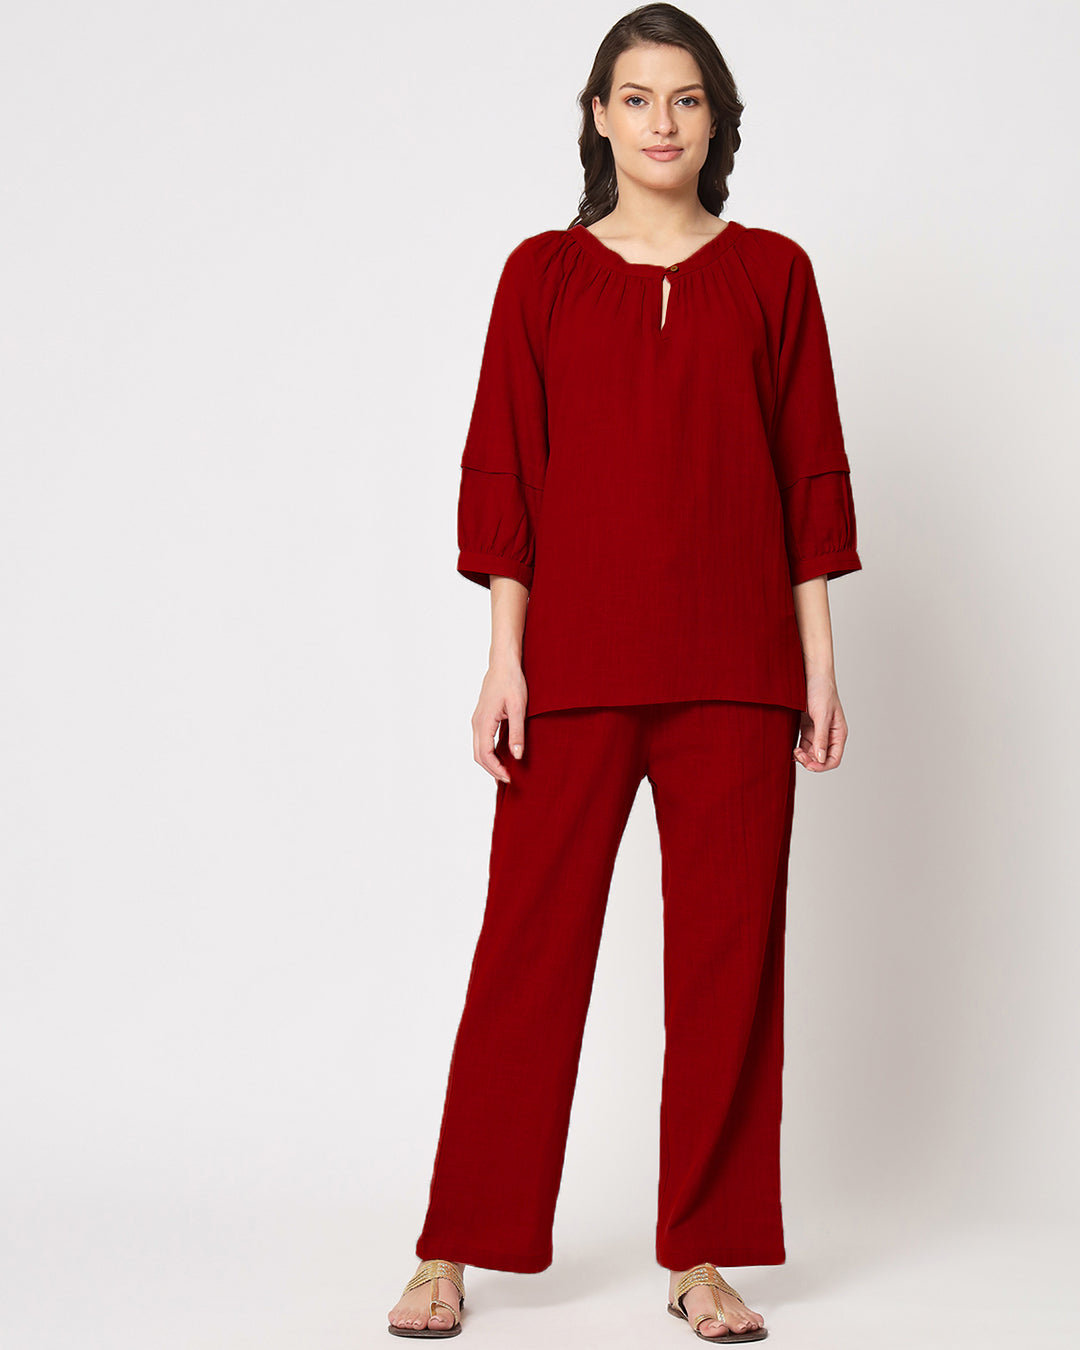 Classic Red Button Neck Solid Top (Without Bottoms)